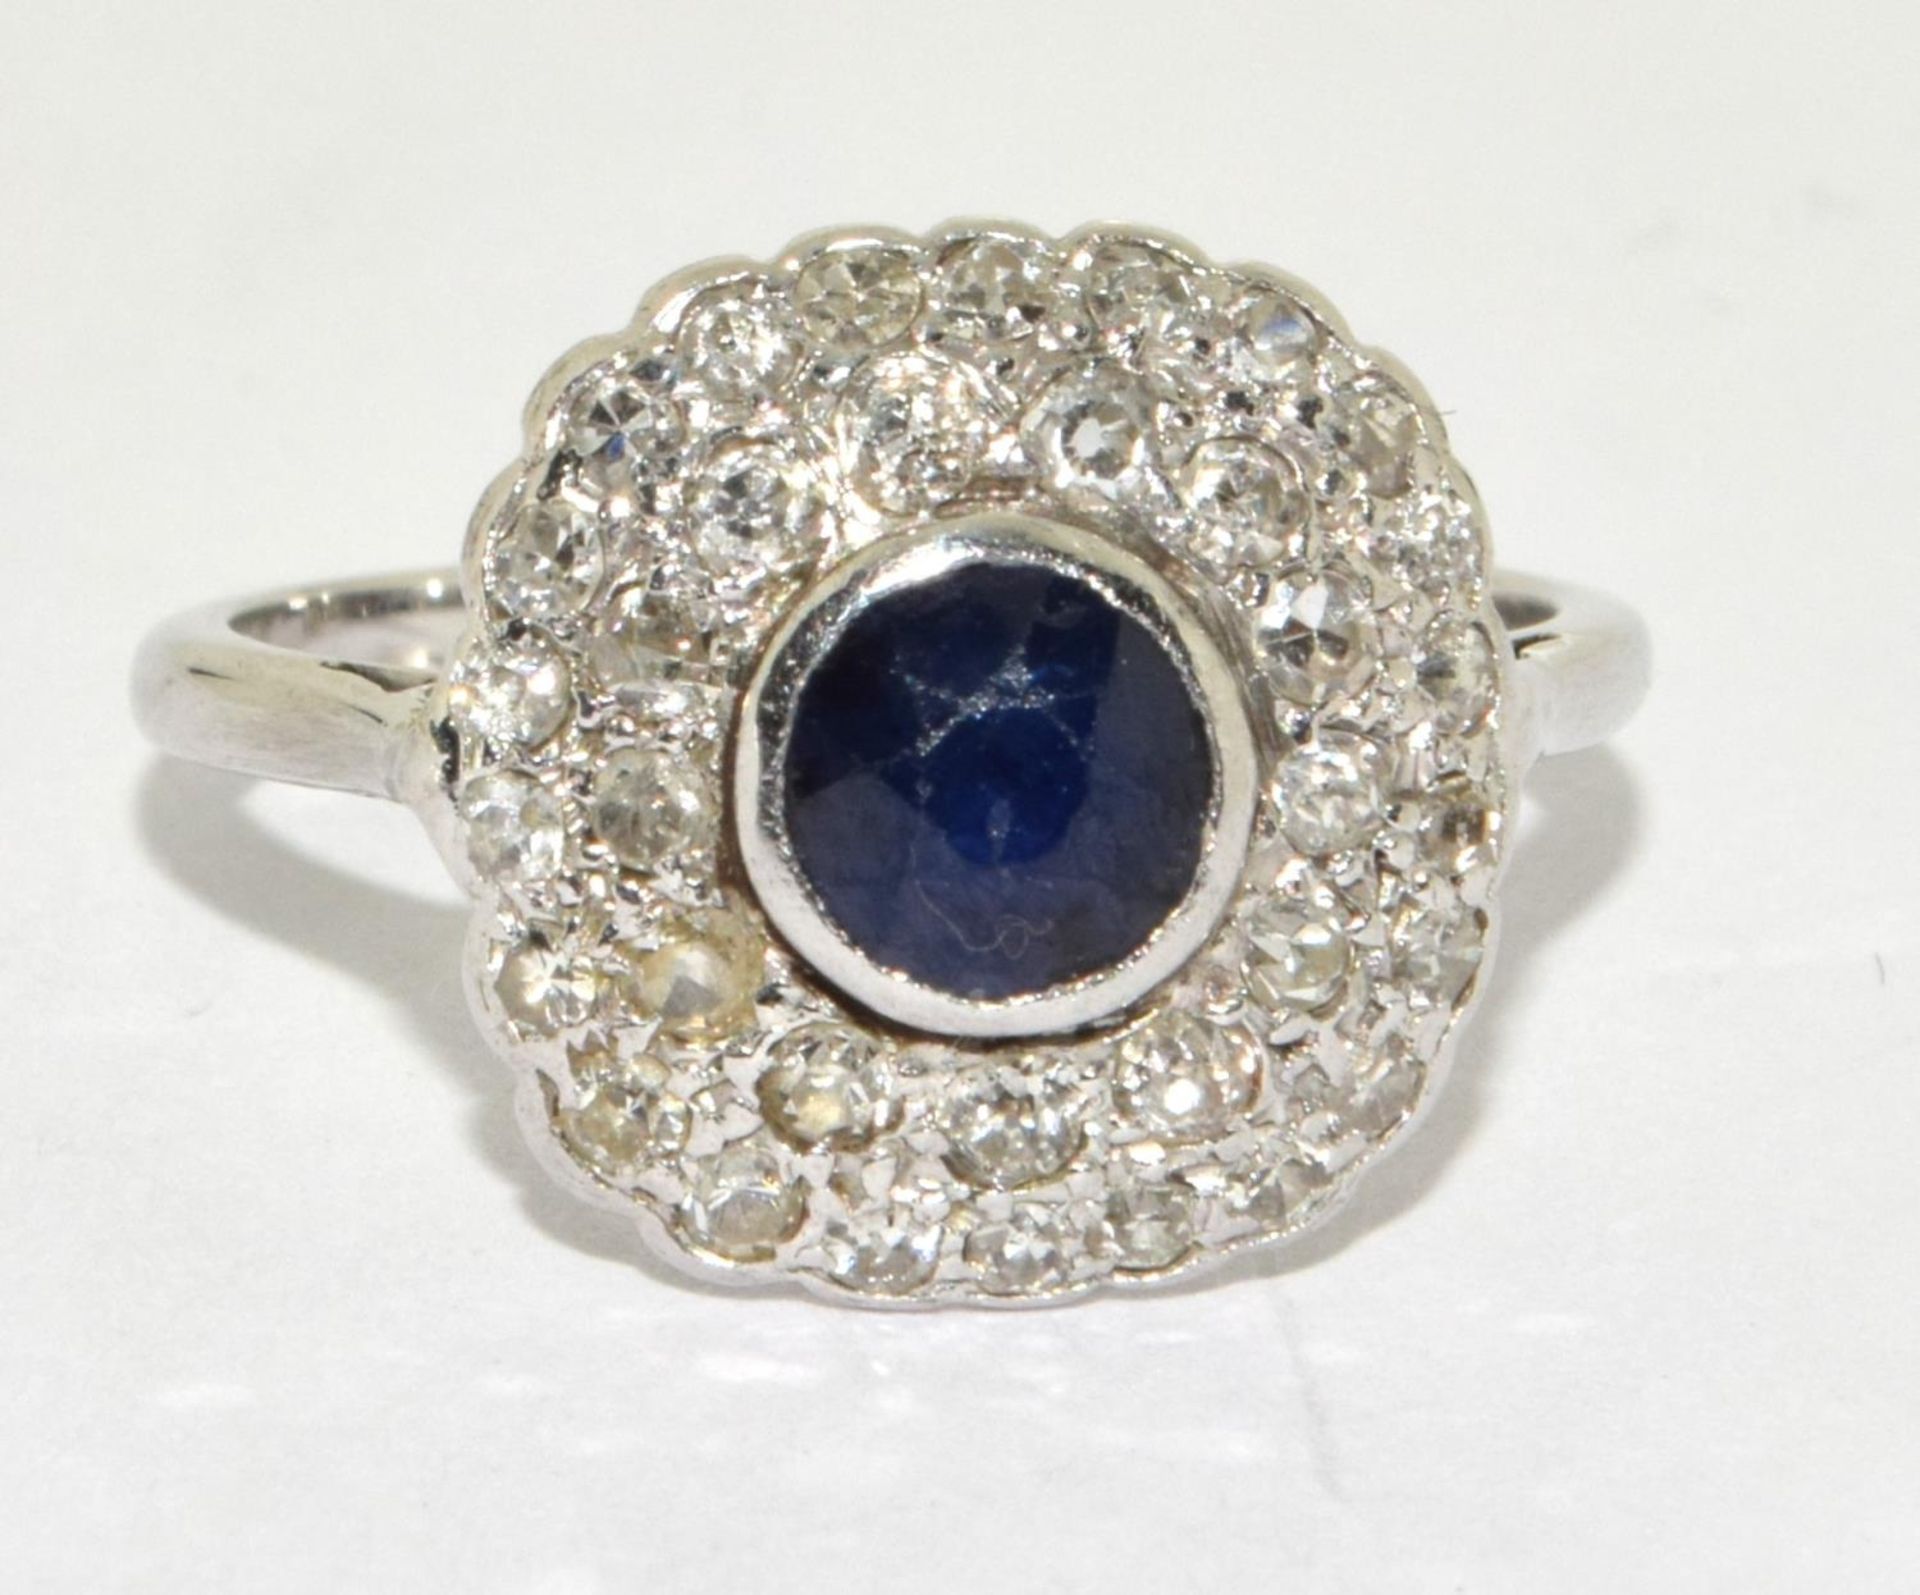 18ct white gold ladies Diamond and Sapphire square face cocktail ring size M